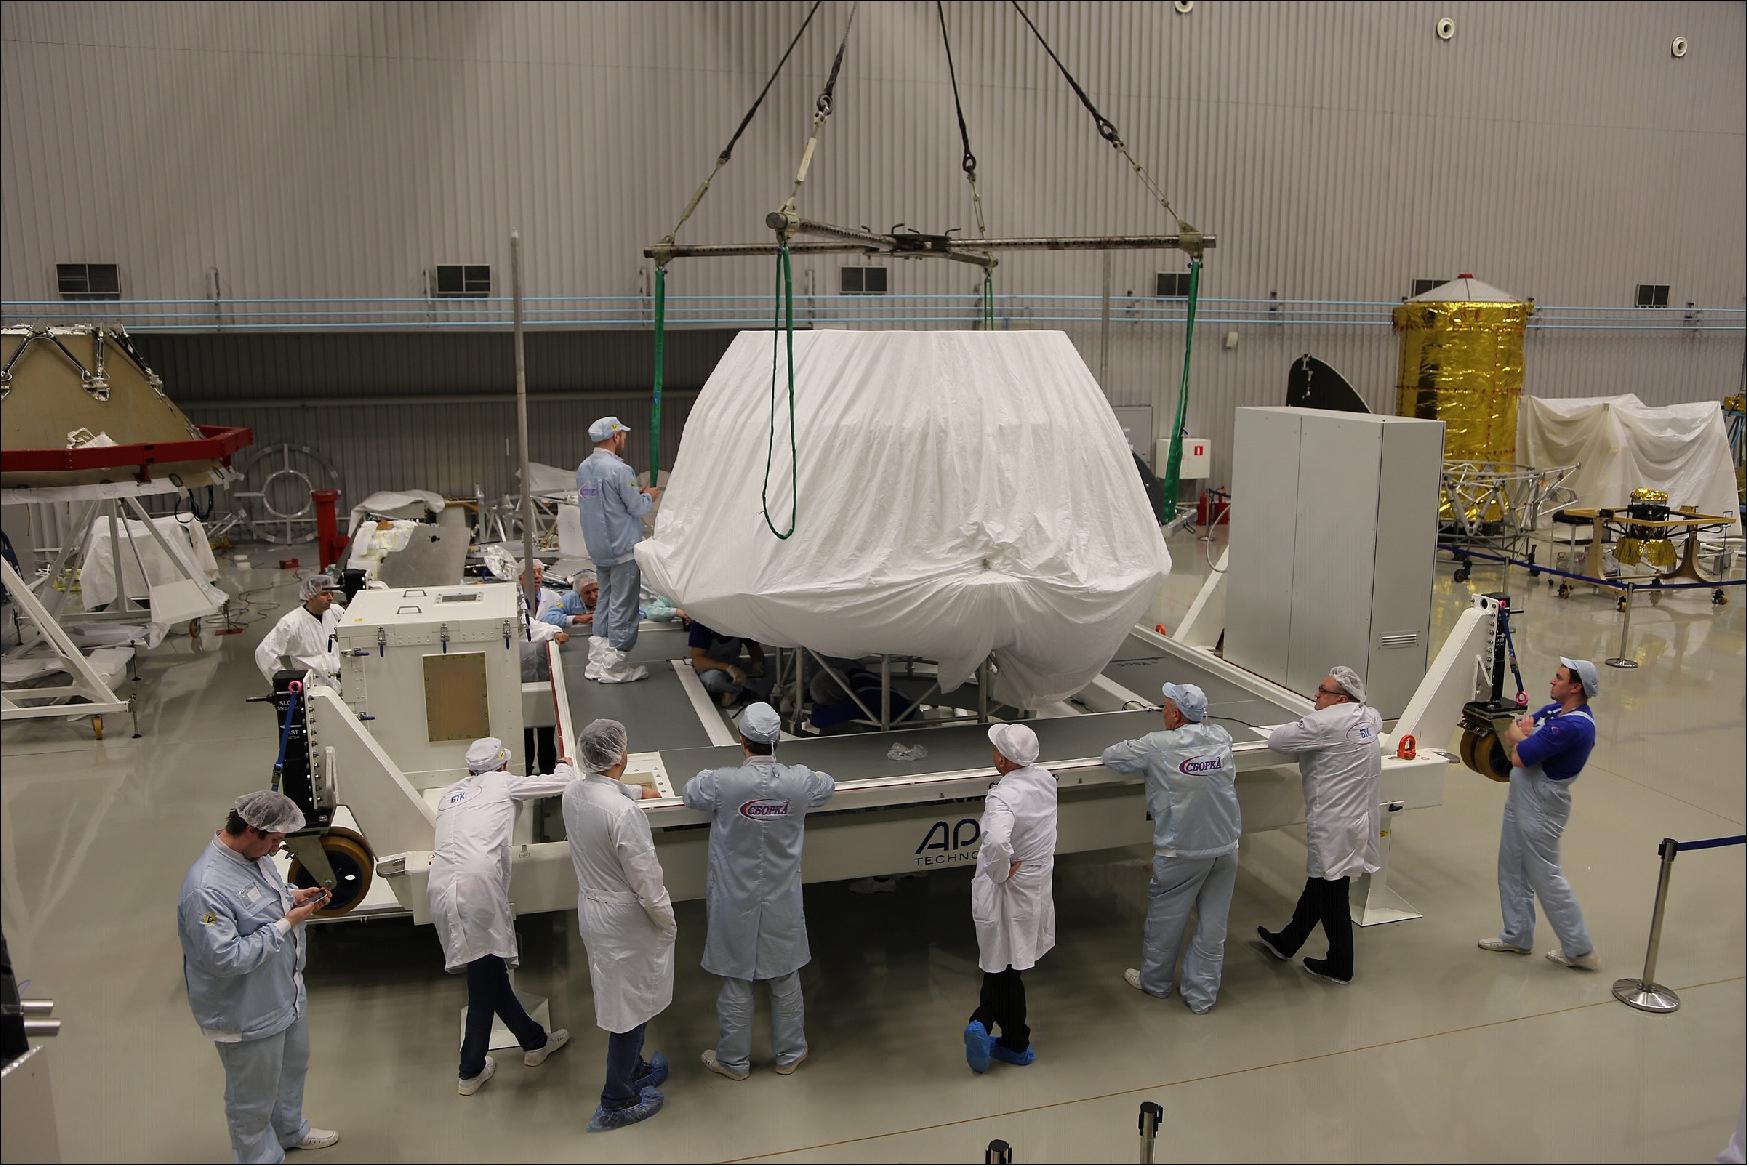 Figure 73: ExoMars surface platform packed for Europe (image credit: Roscomos/Lavochkin)